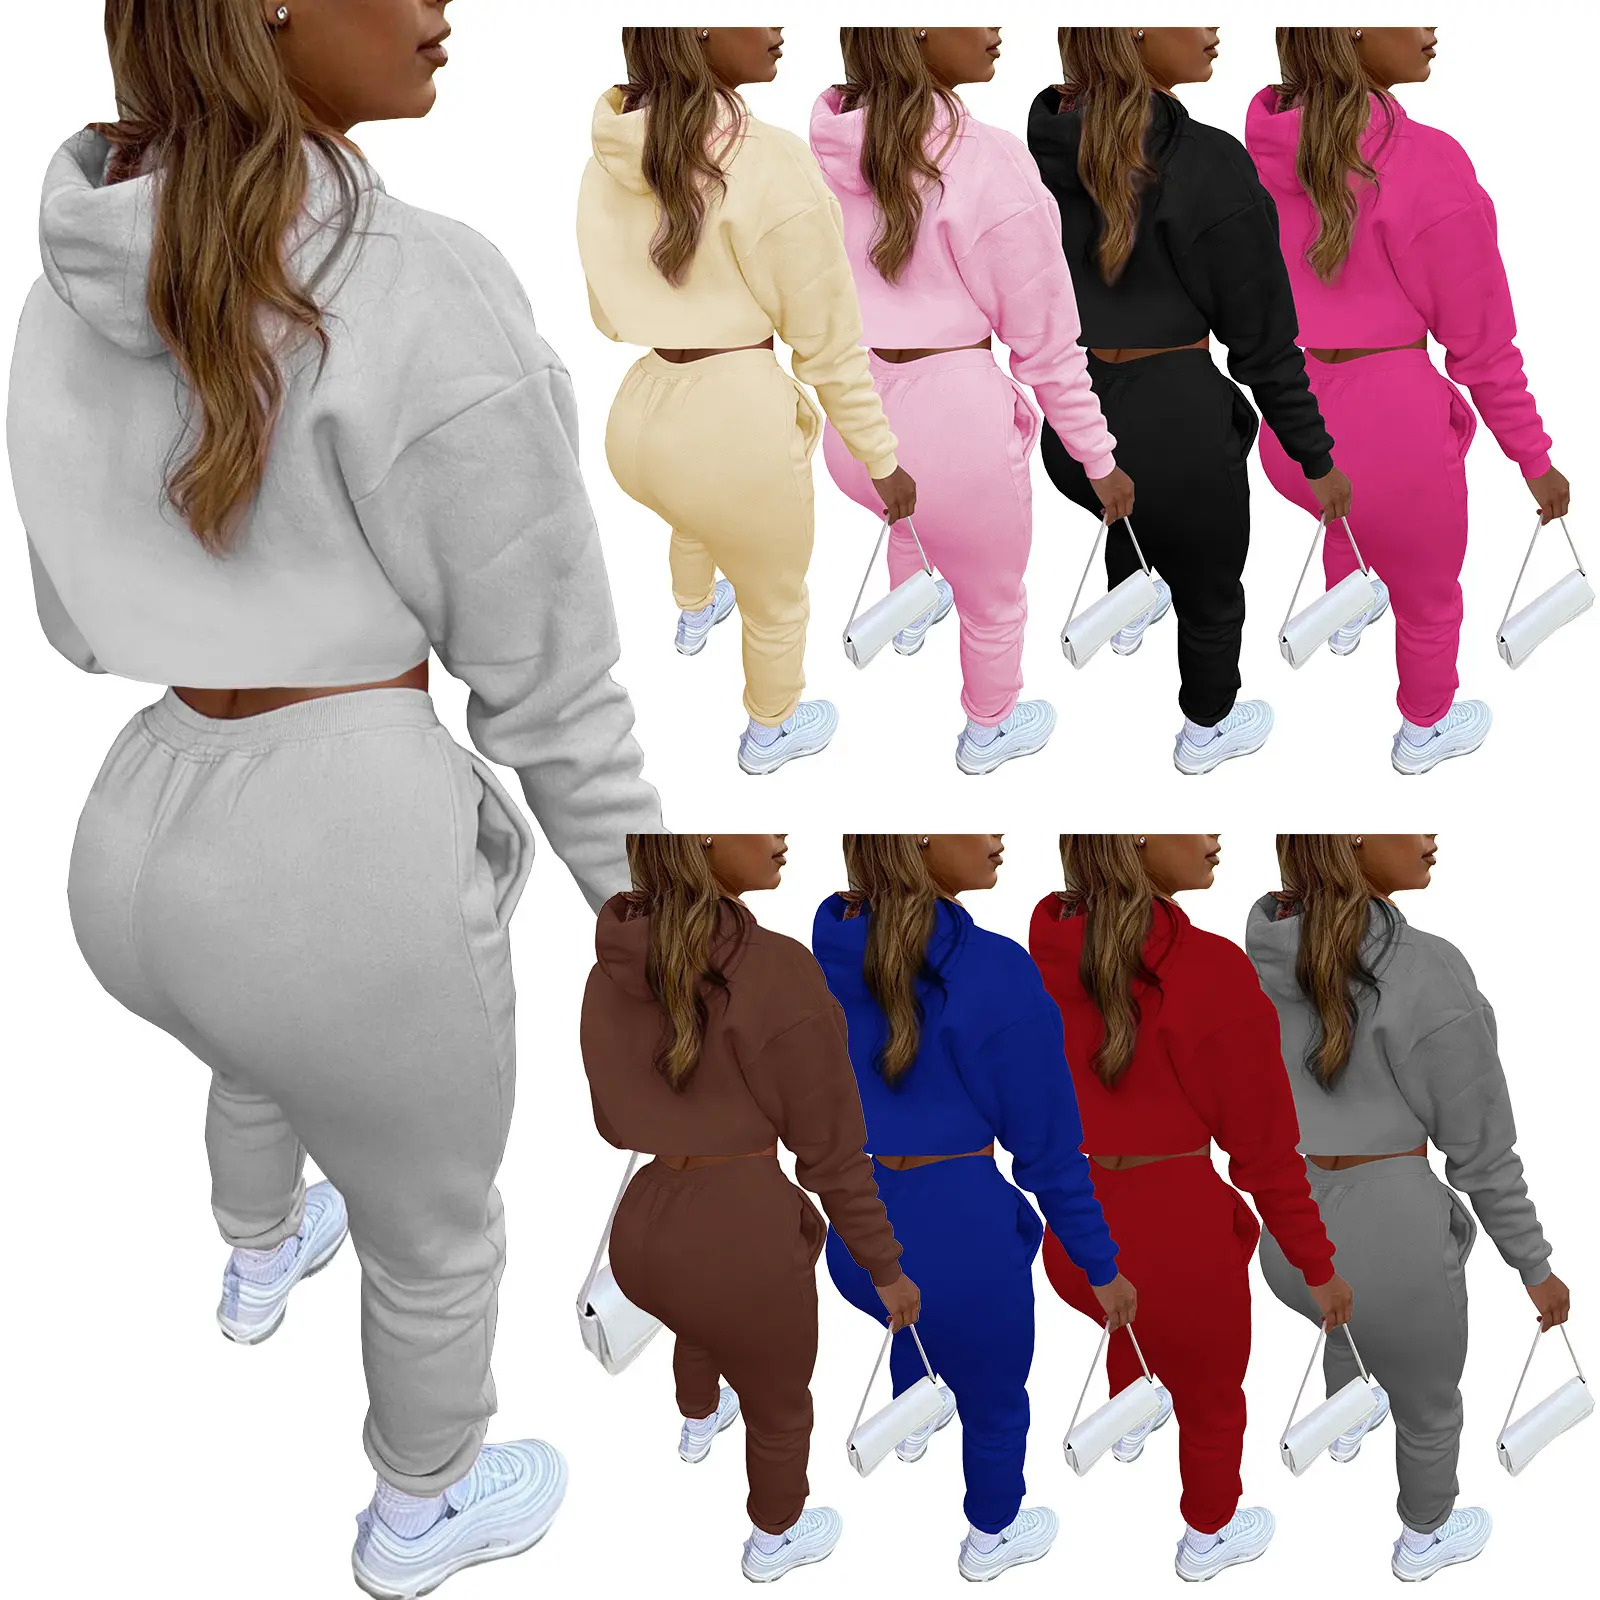 Sayhi Women's Sweatsuit Solid Pants Long Sleeve Hoodies Two Piece Outfits  Plus Size Loungewear Casual Summer Tracksuit Sets Grey S 